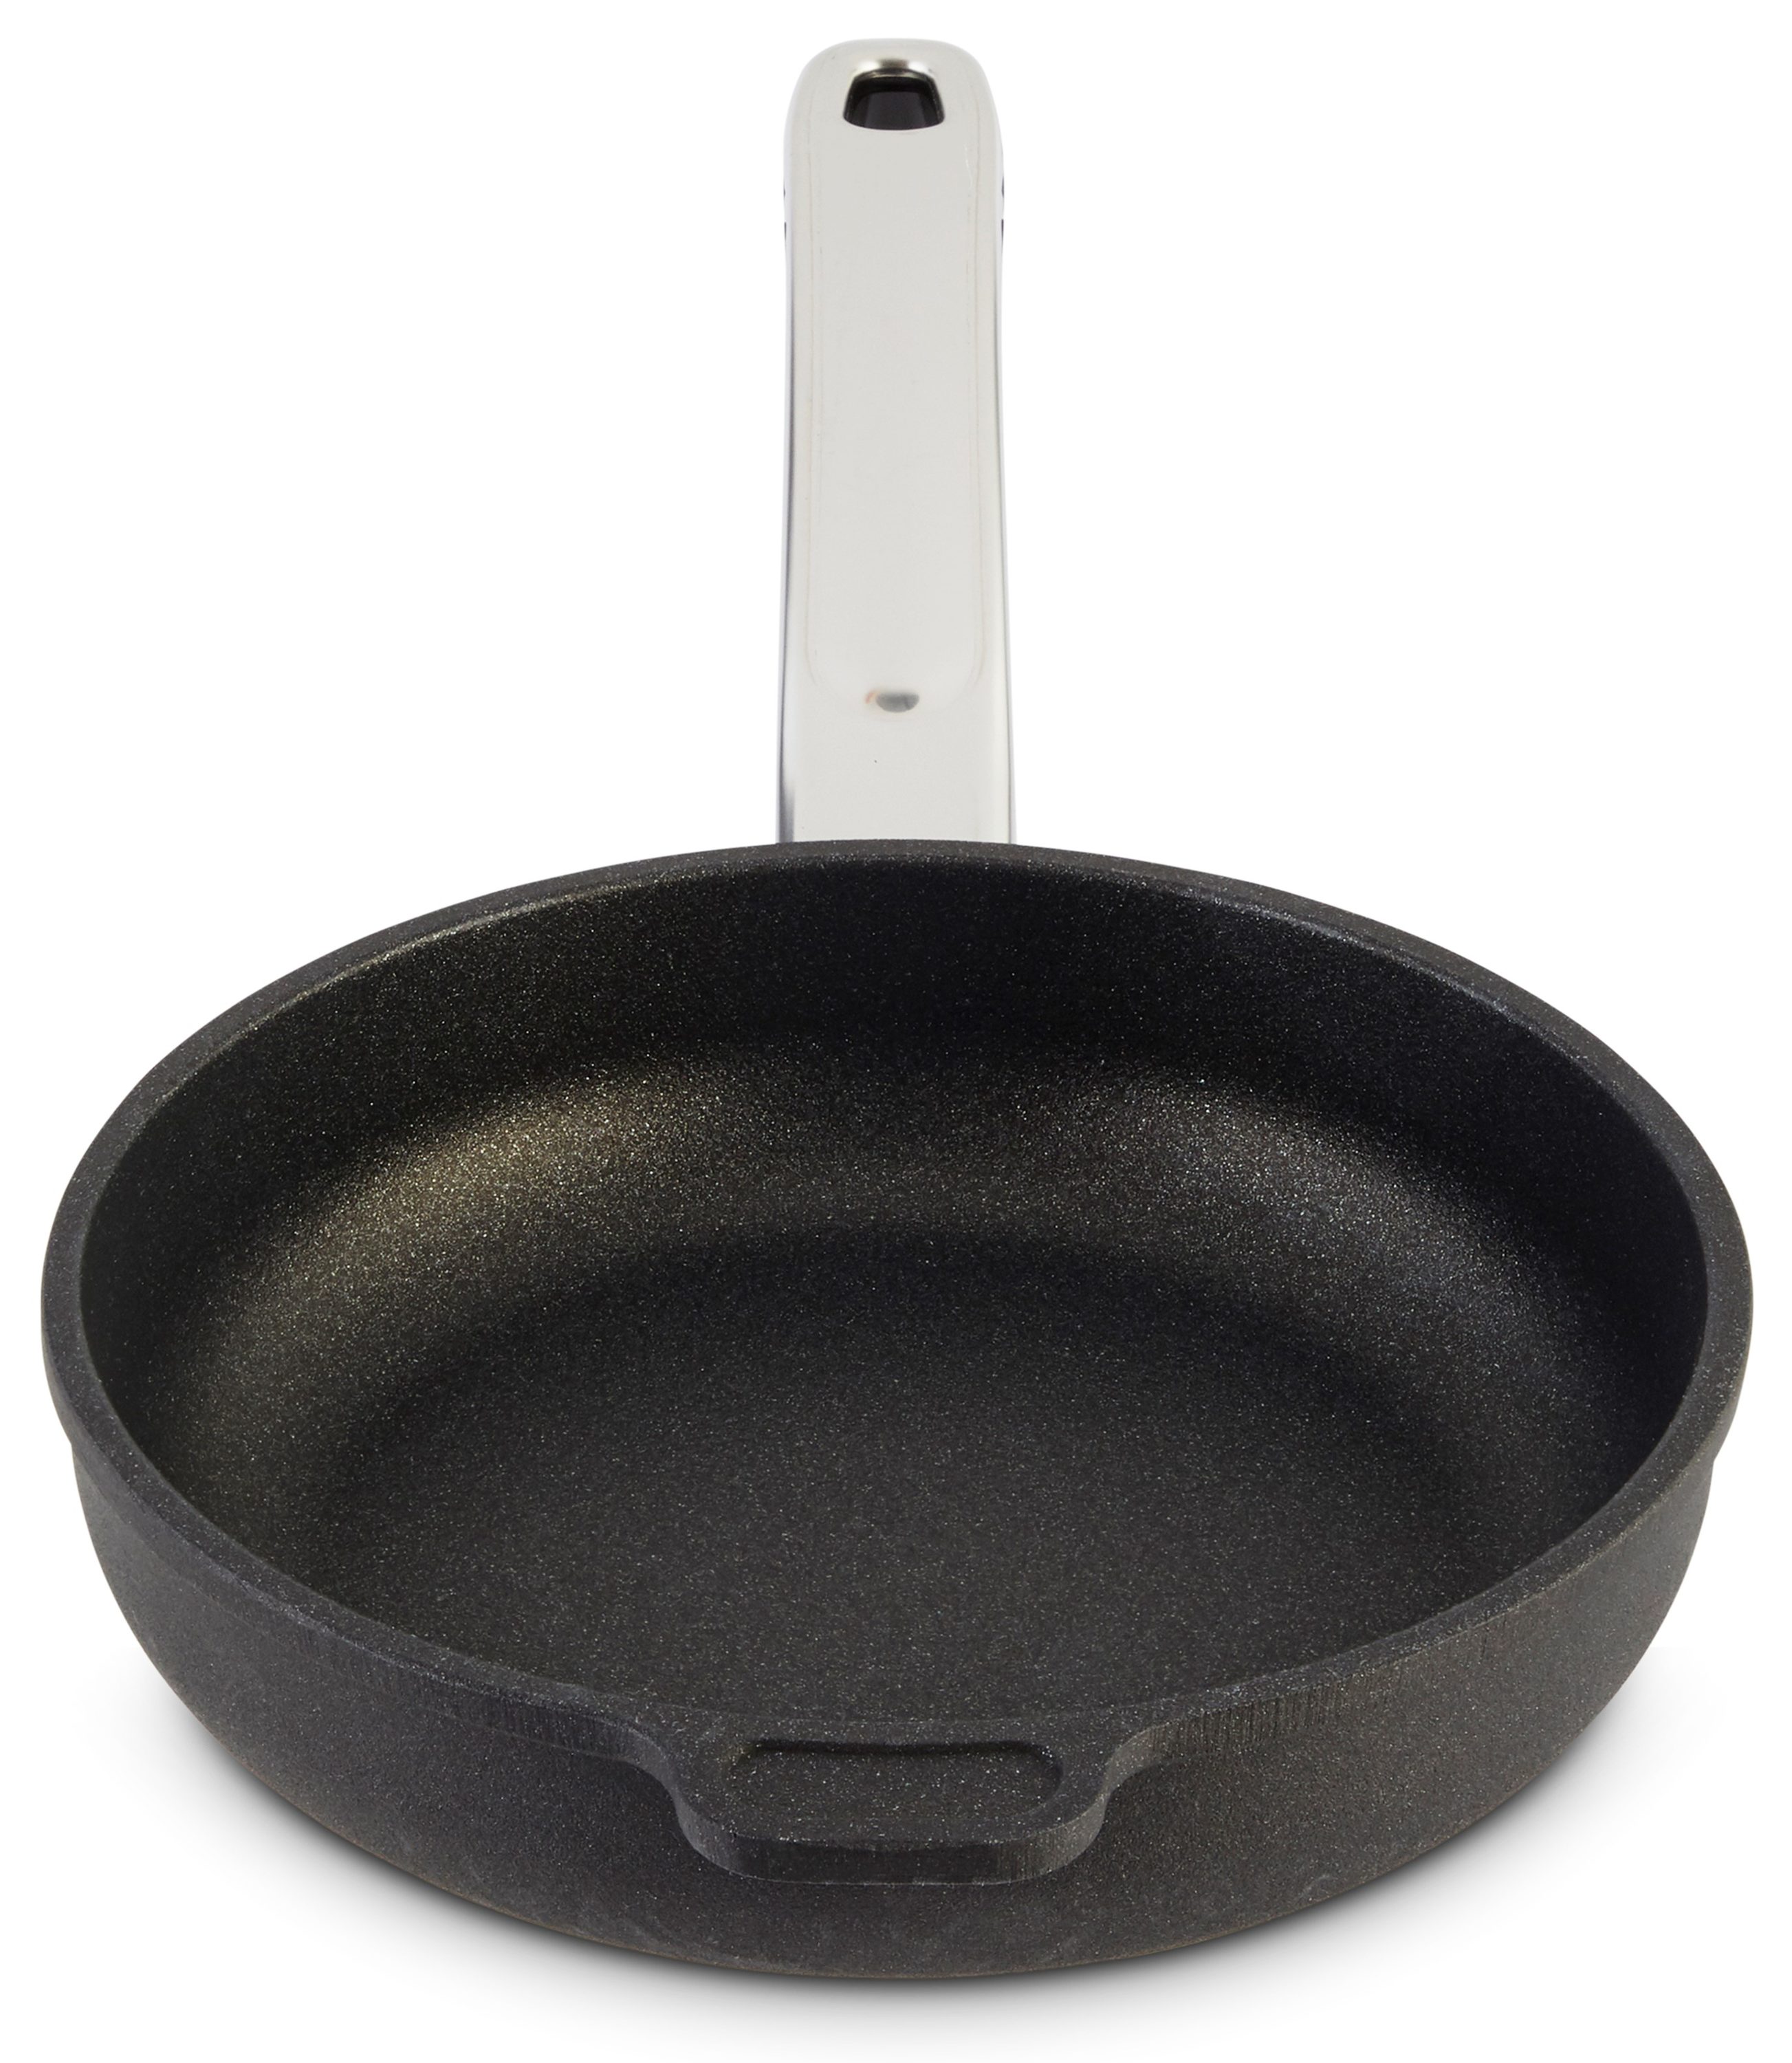 10 Stone Earth Frying Pan by Ozeri, with 100% APEO & 10-Inch, Granite Gray